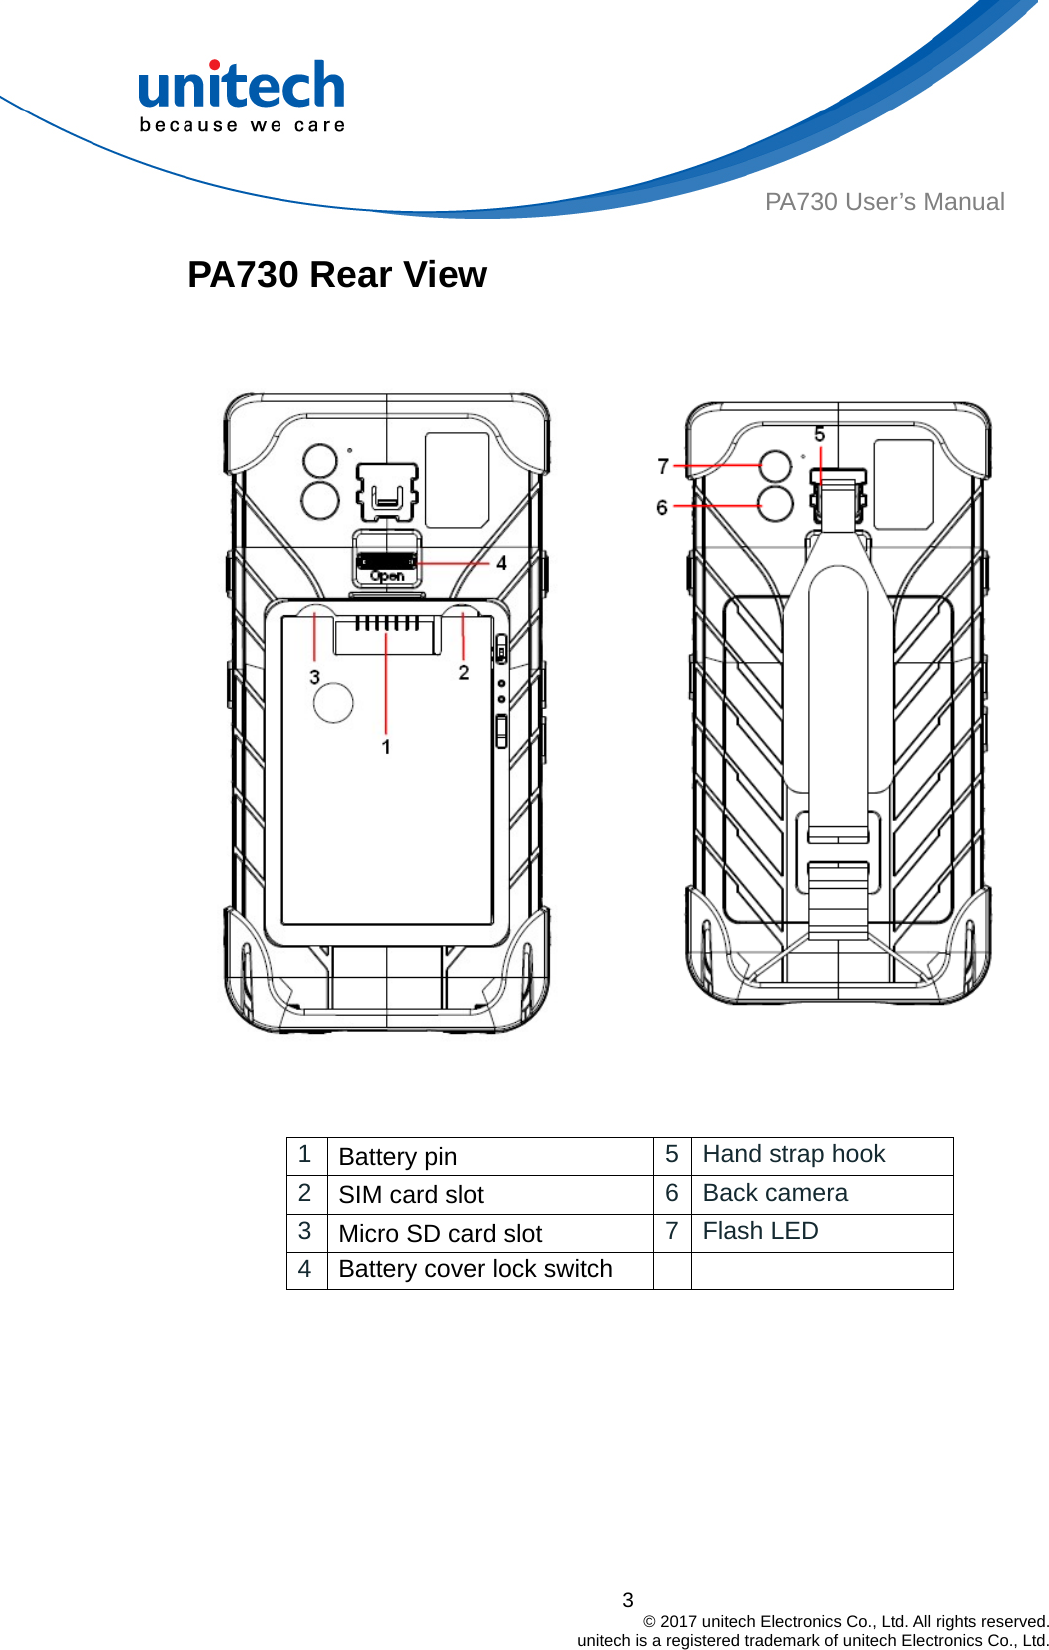  PA730 User’s Manual PA730 Rear View                     3                                         © 2017 unitech Electronics Co., Ltd. All rights reserved.                                             unitech is a registered trademark of unitech Electronics Co., Ltd.       1  Battery pin  5 Hand strap hook 2  6 Back camera SIM card slot 3  Micro SD card slot  7Flash LED 4  Battery cover lock switch   